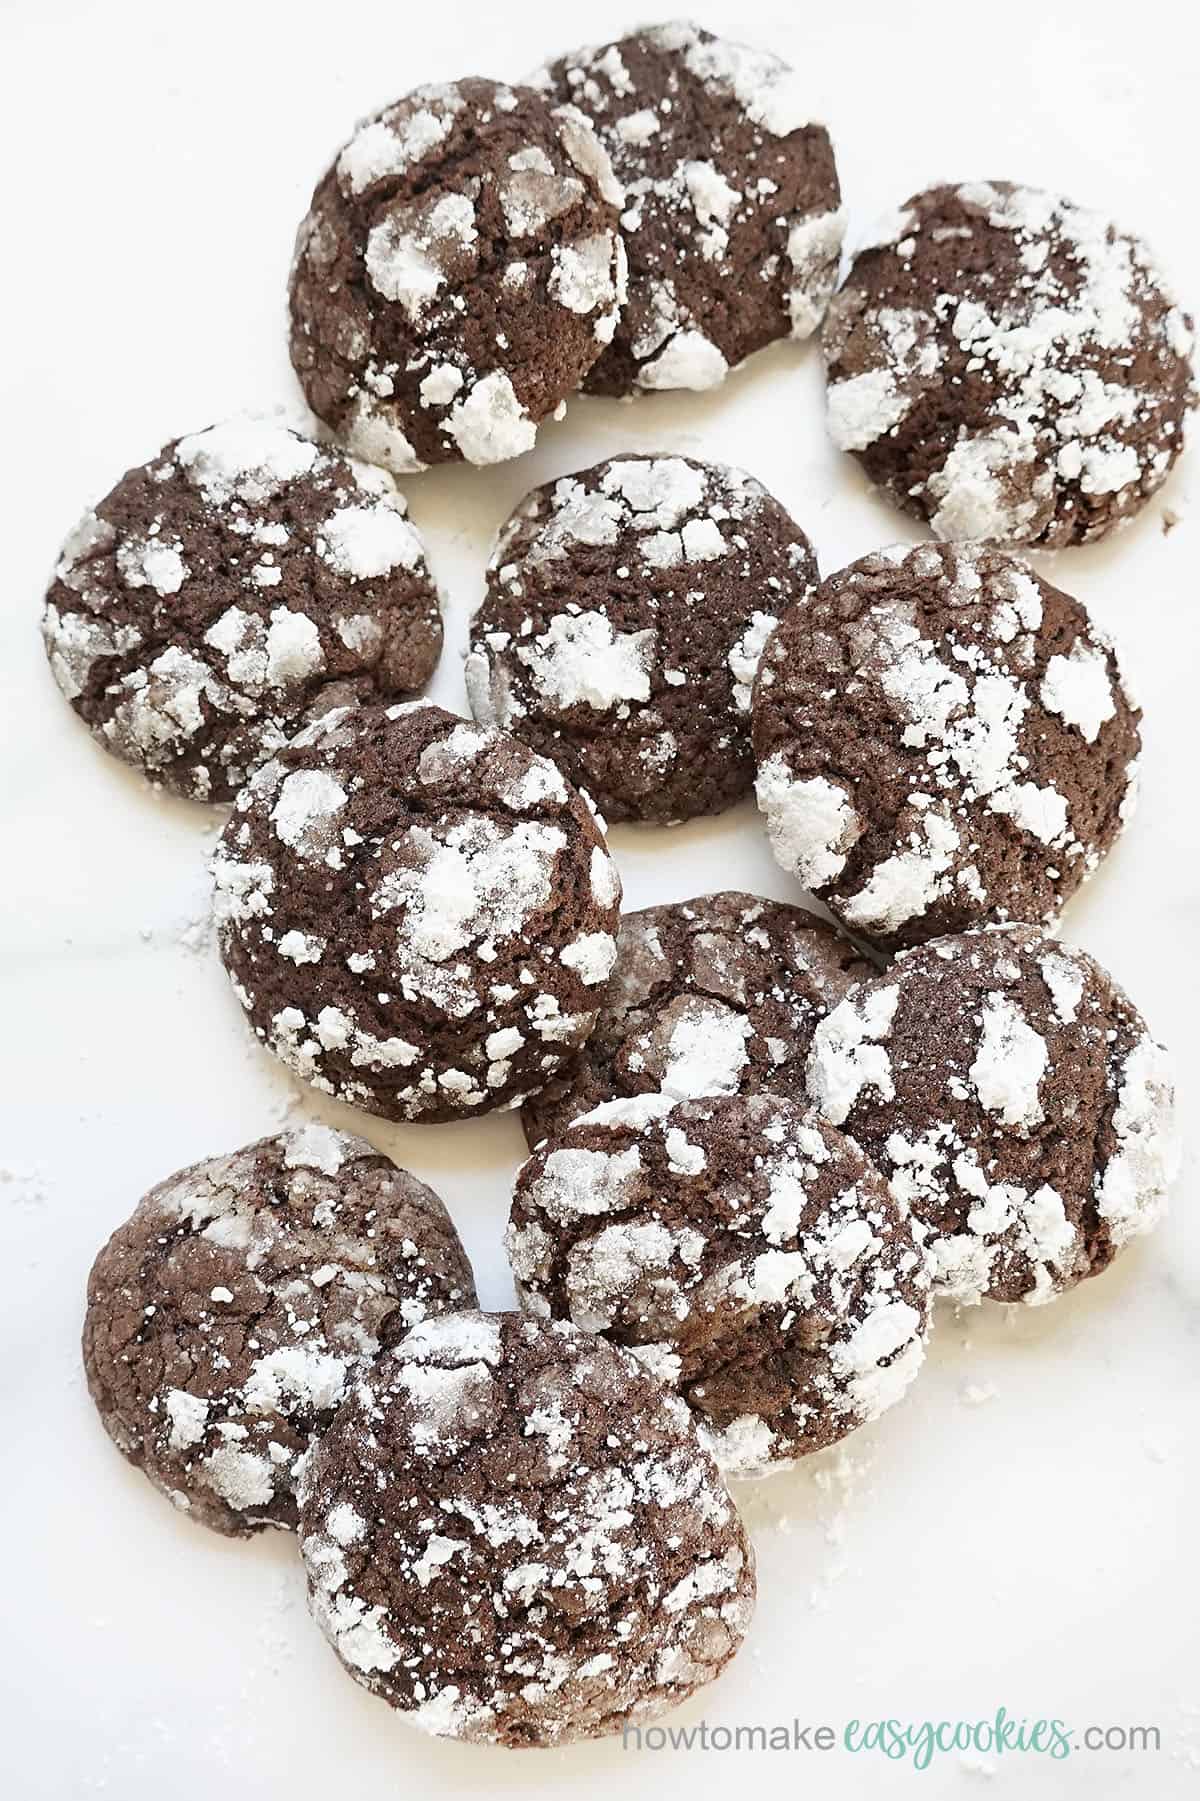 The BEST CHOCOLATE CRINKLE COOKIES -- Lightly crisp on the outside, soft and cakey on the inside, this EASY RECIPE is a favorite.